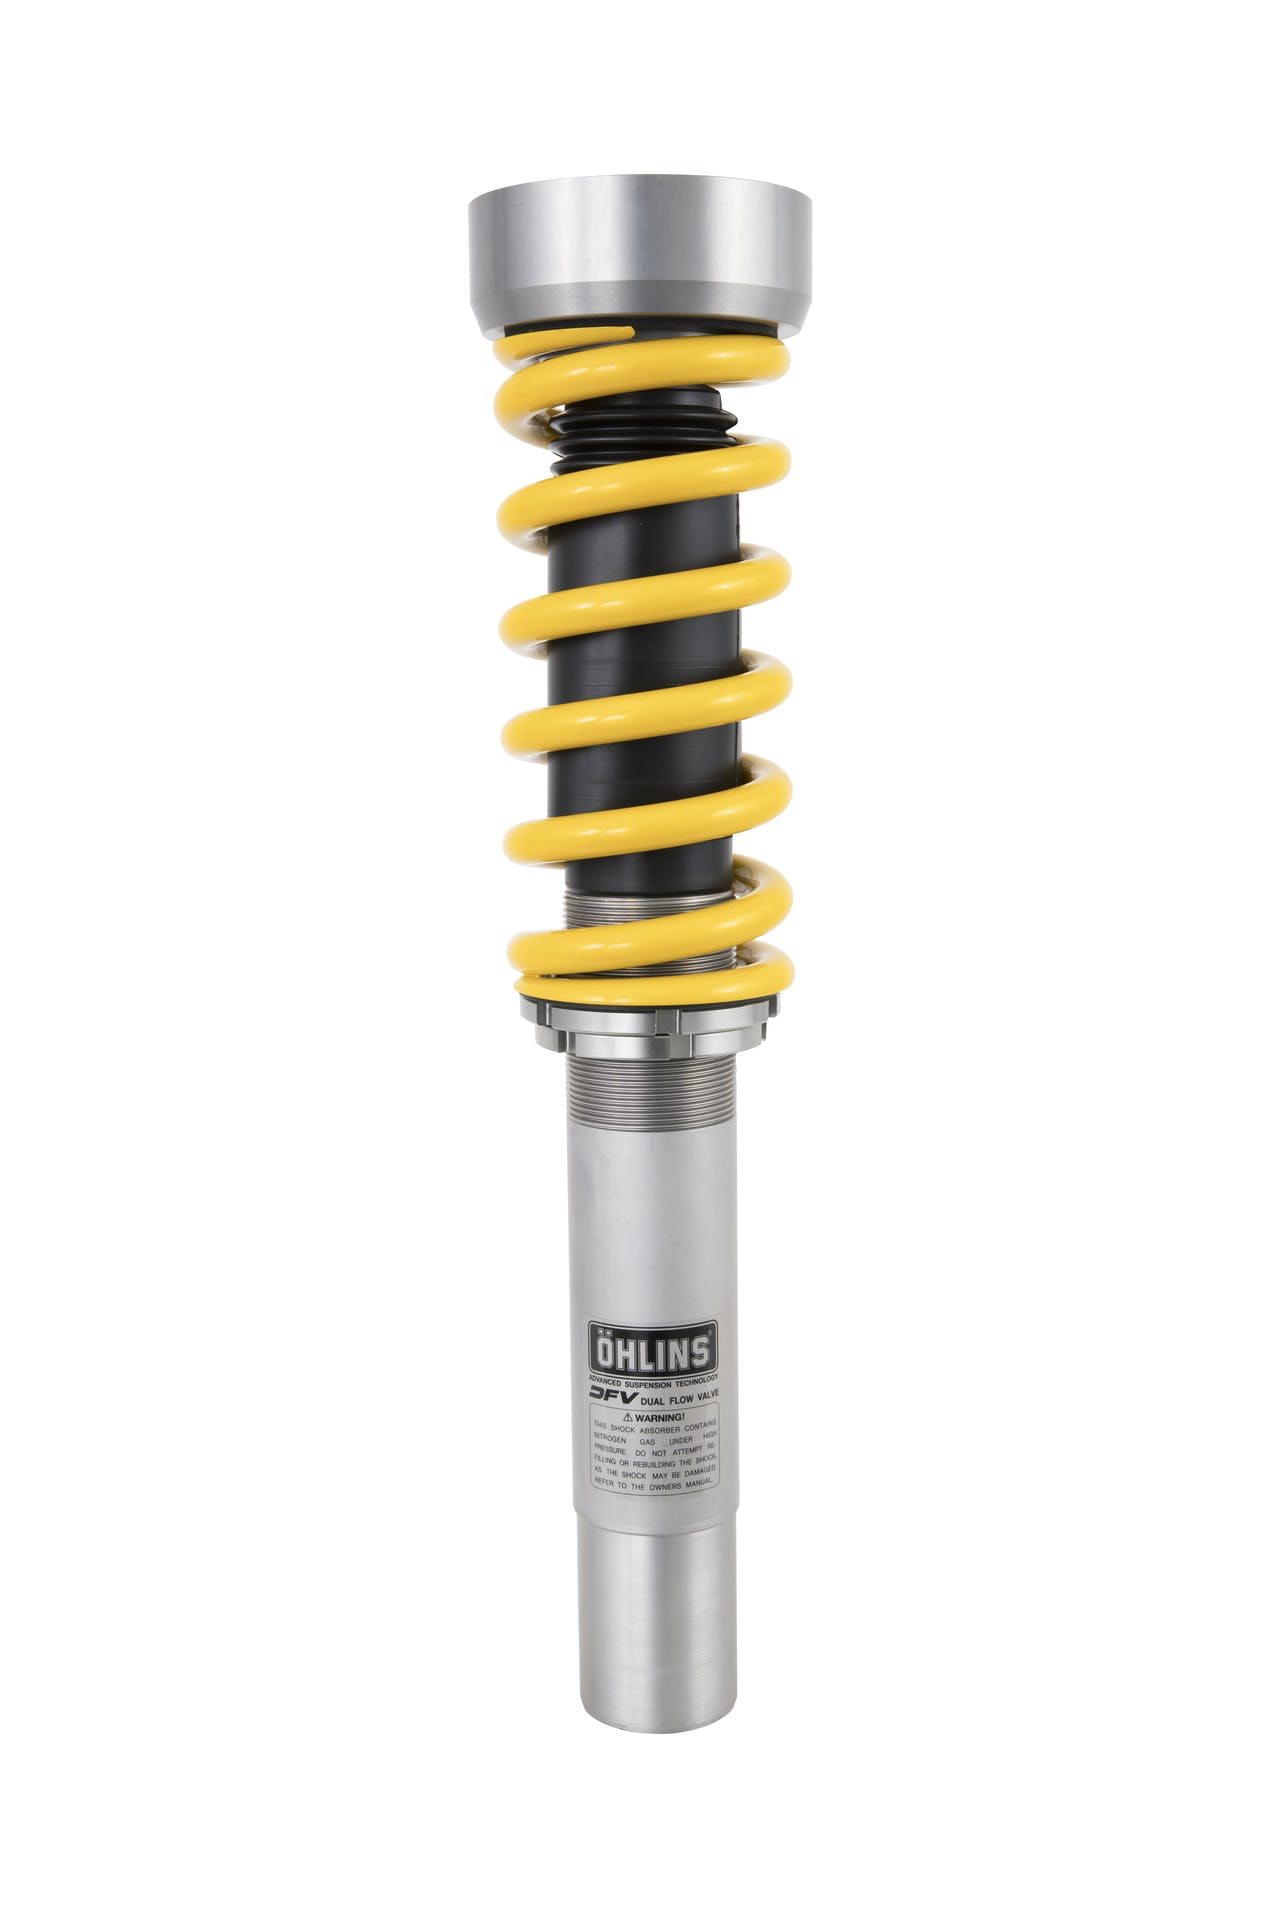 Ohlins B8 A4 / S4 / A5 / S5 Coilover Suspension - Road & Track 